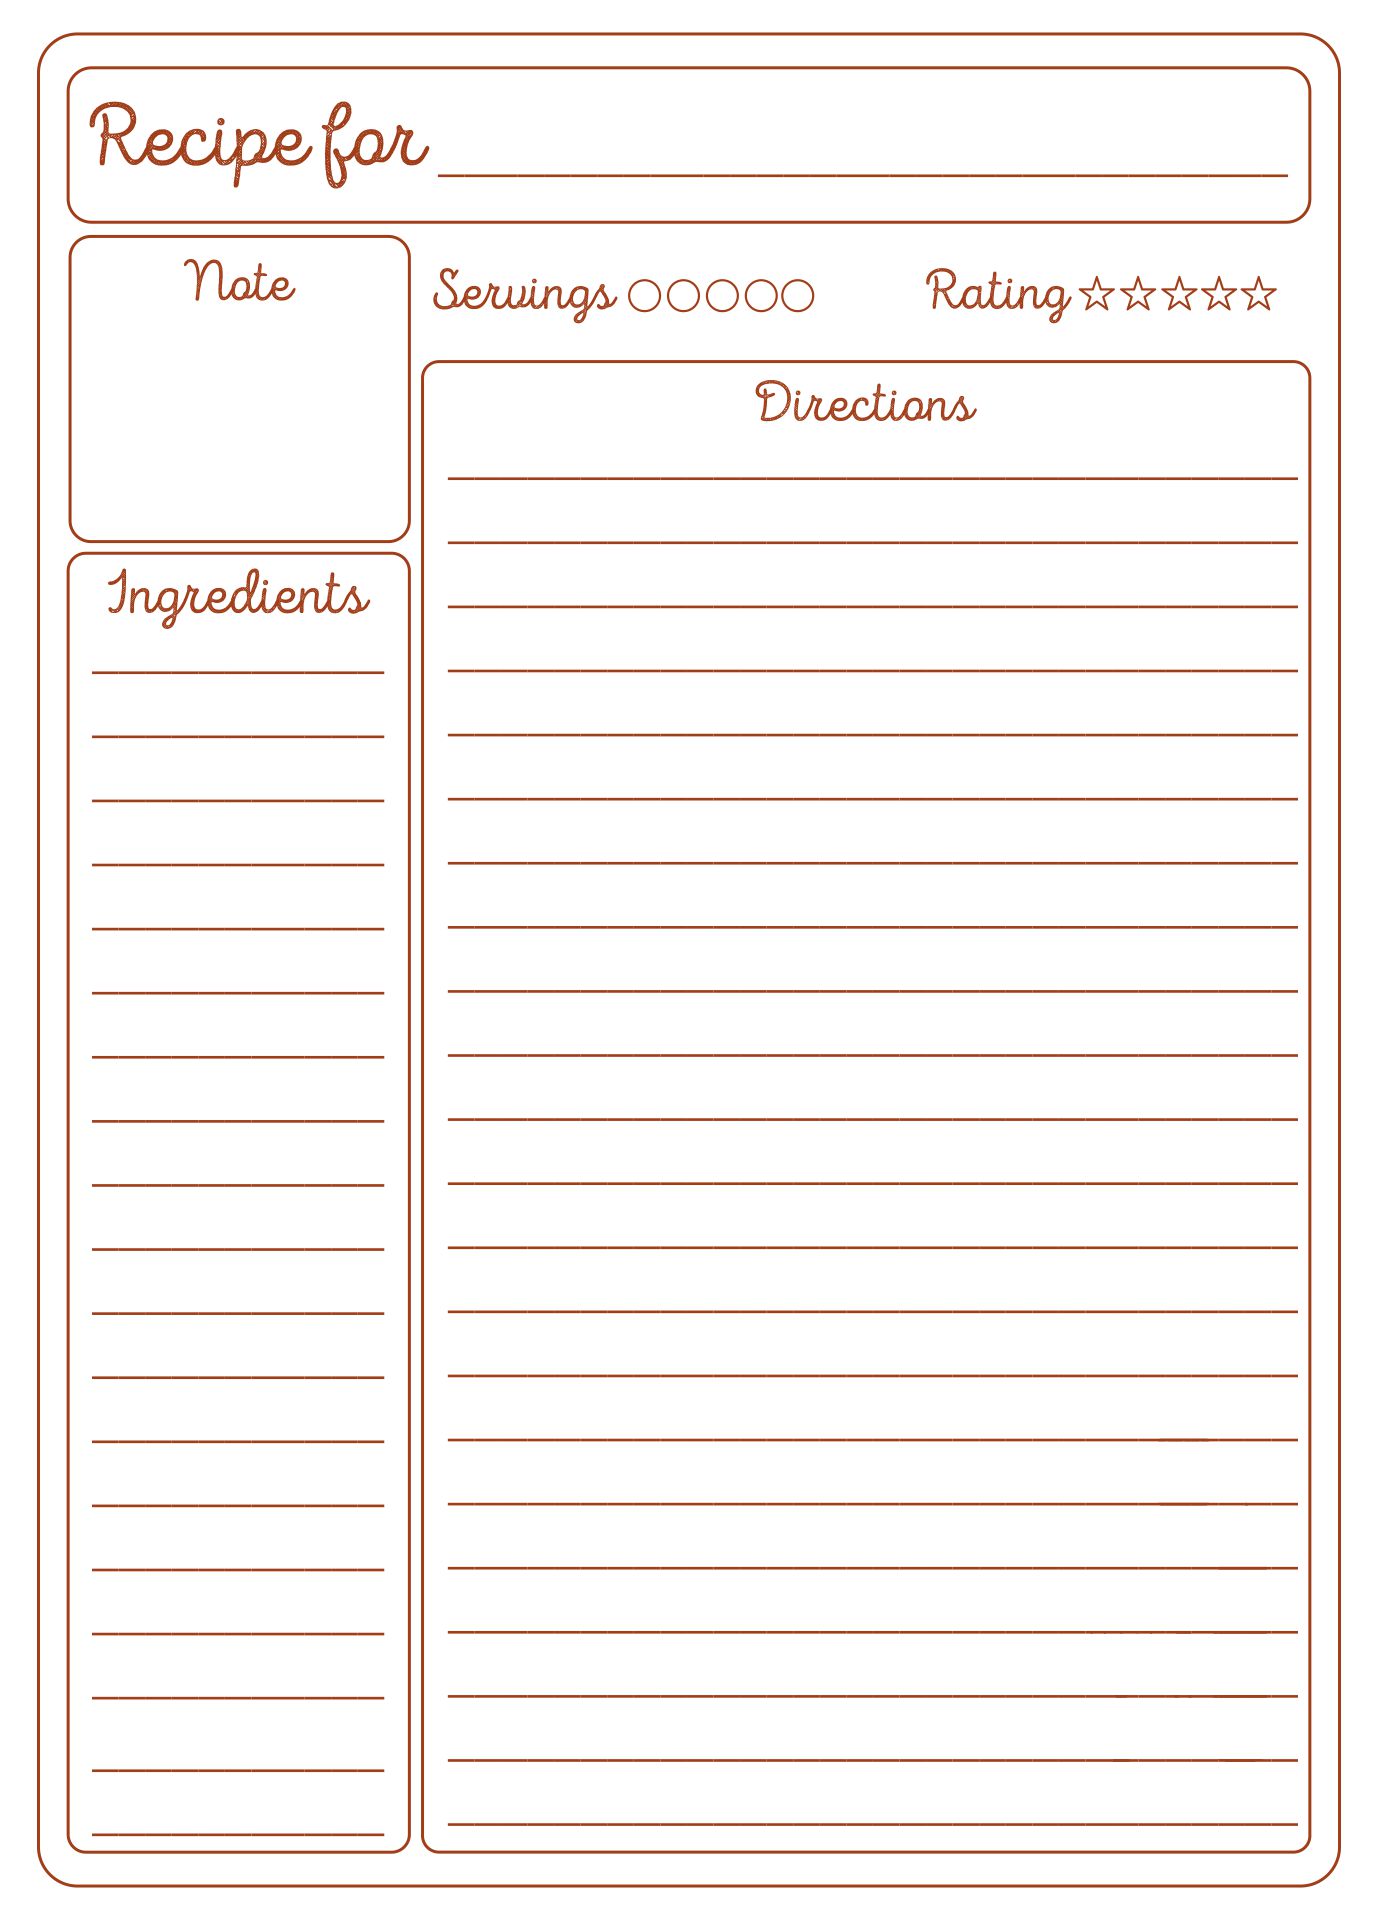 word-recipe-card-template-4x6-for-your-needs